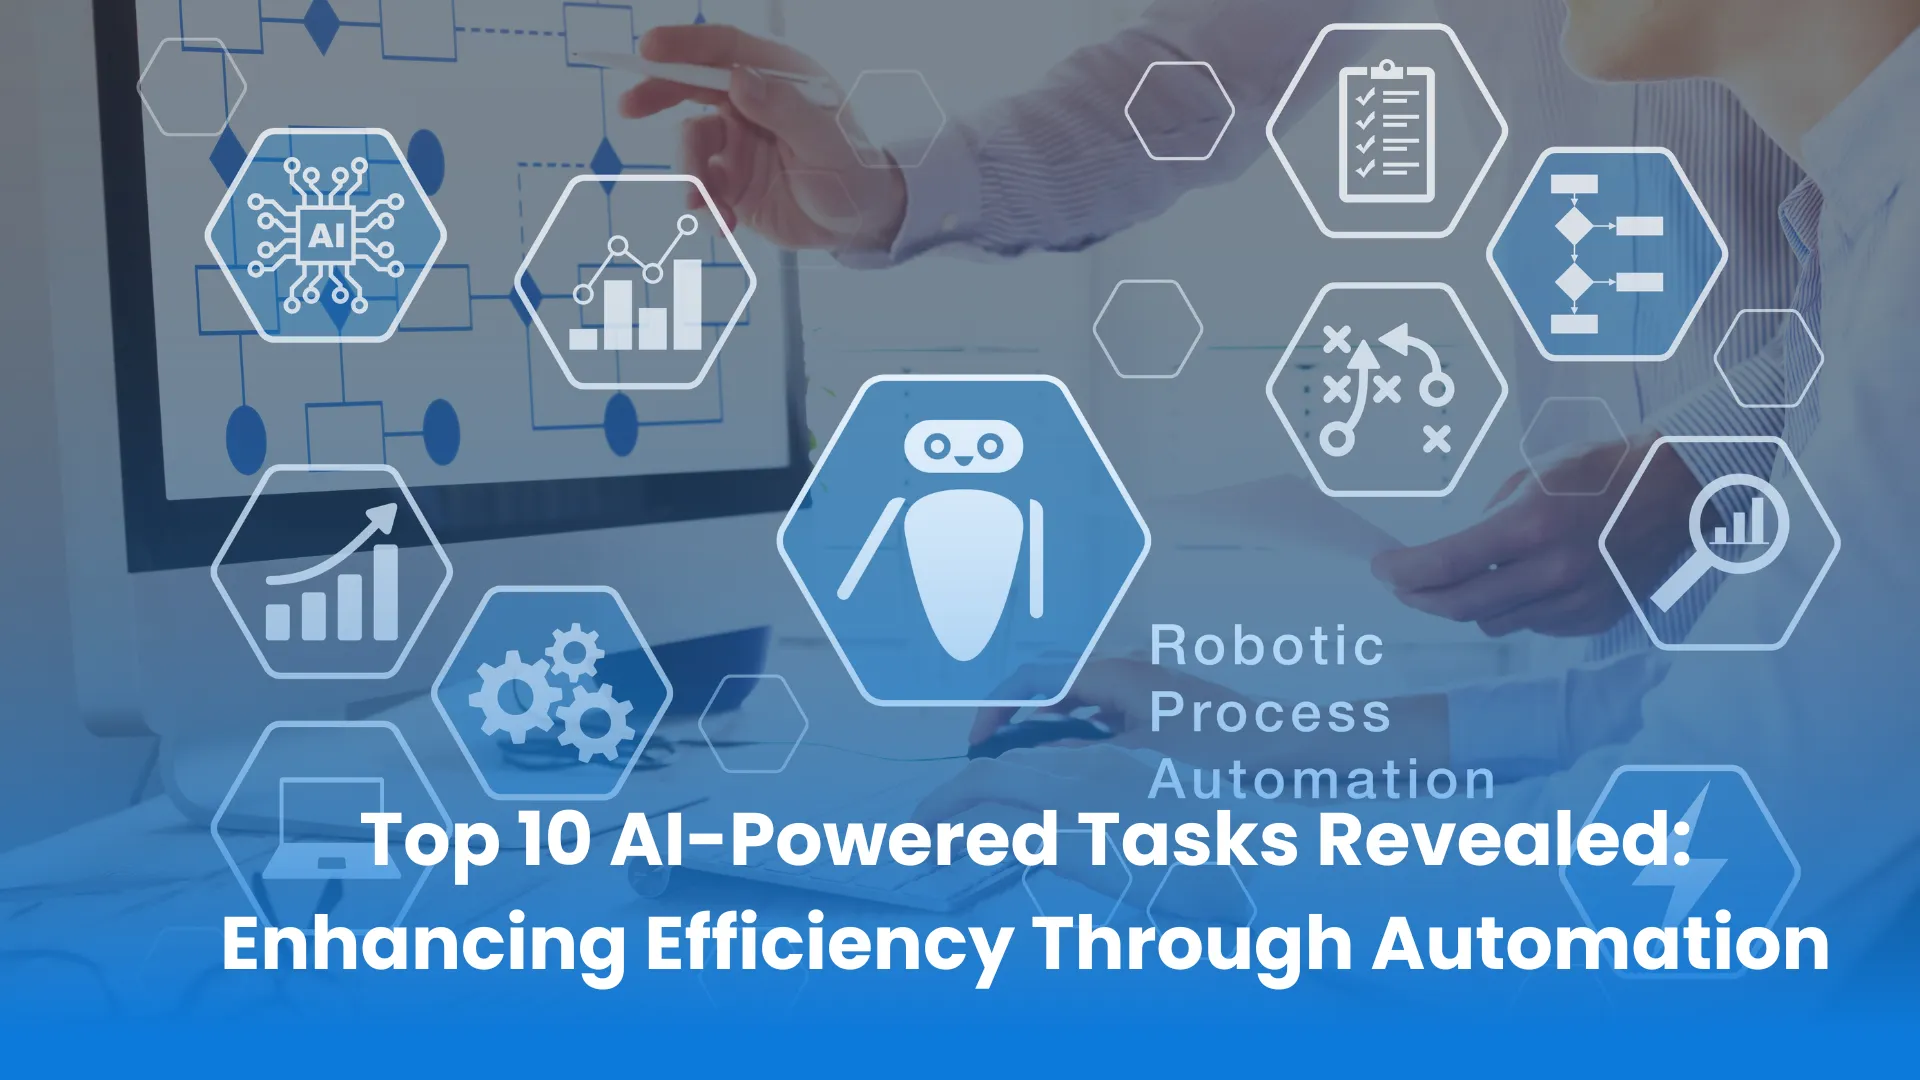 Top 10 AI-Powered Tasks Revealed: Enhancing Efficiency Through Automation